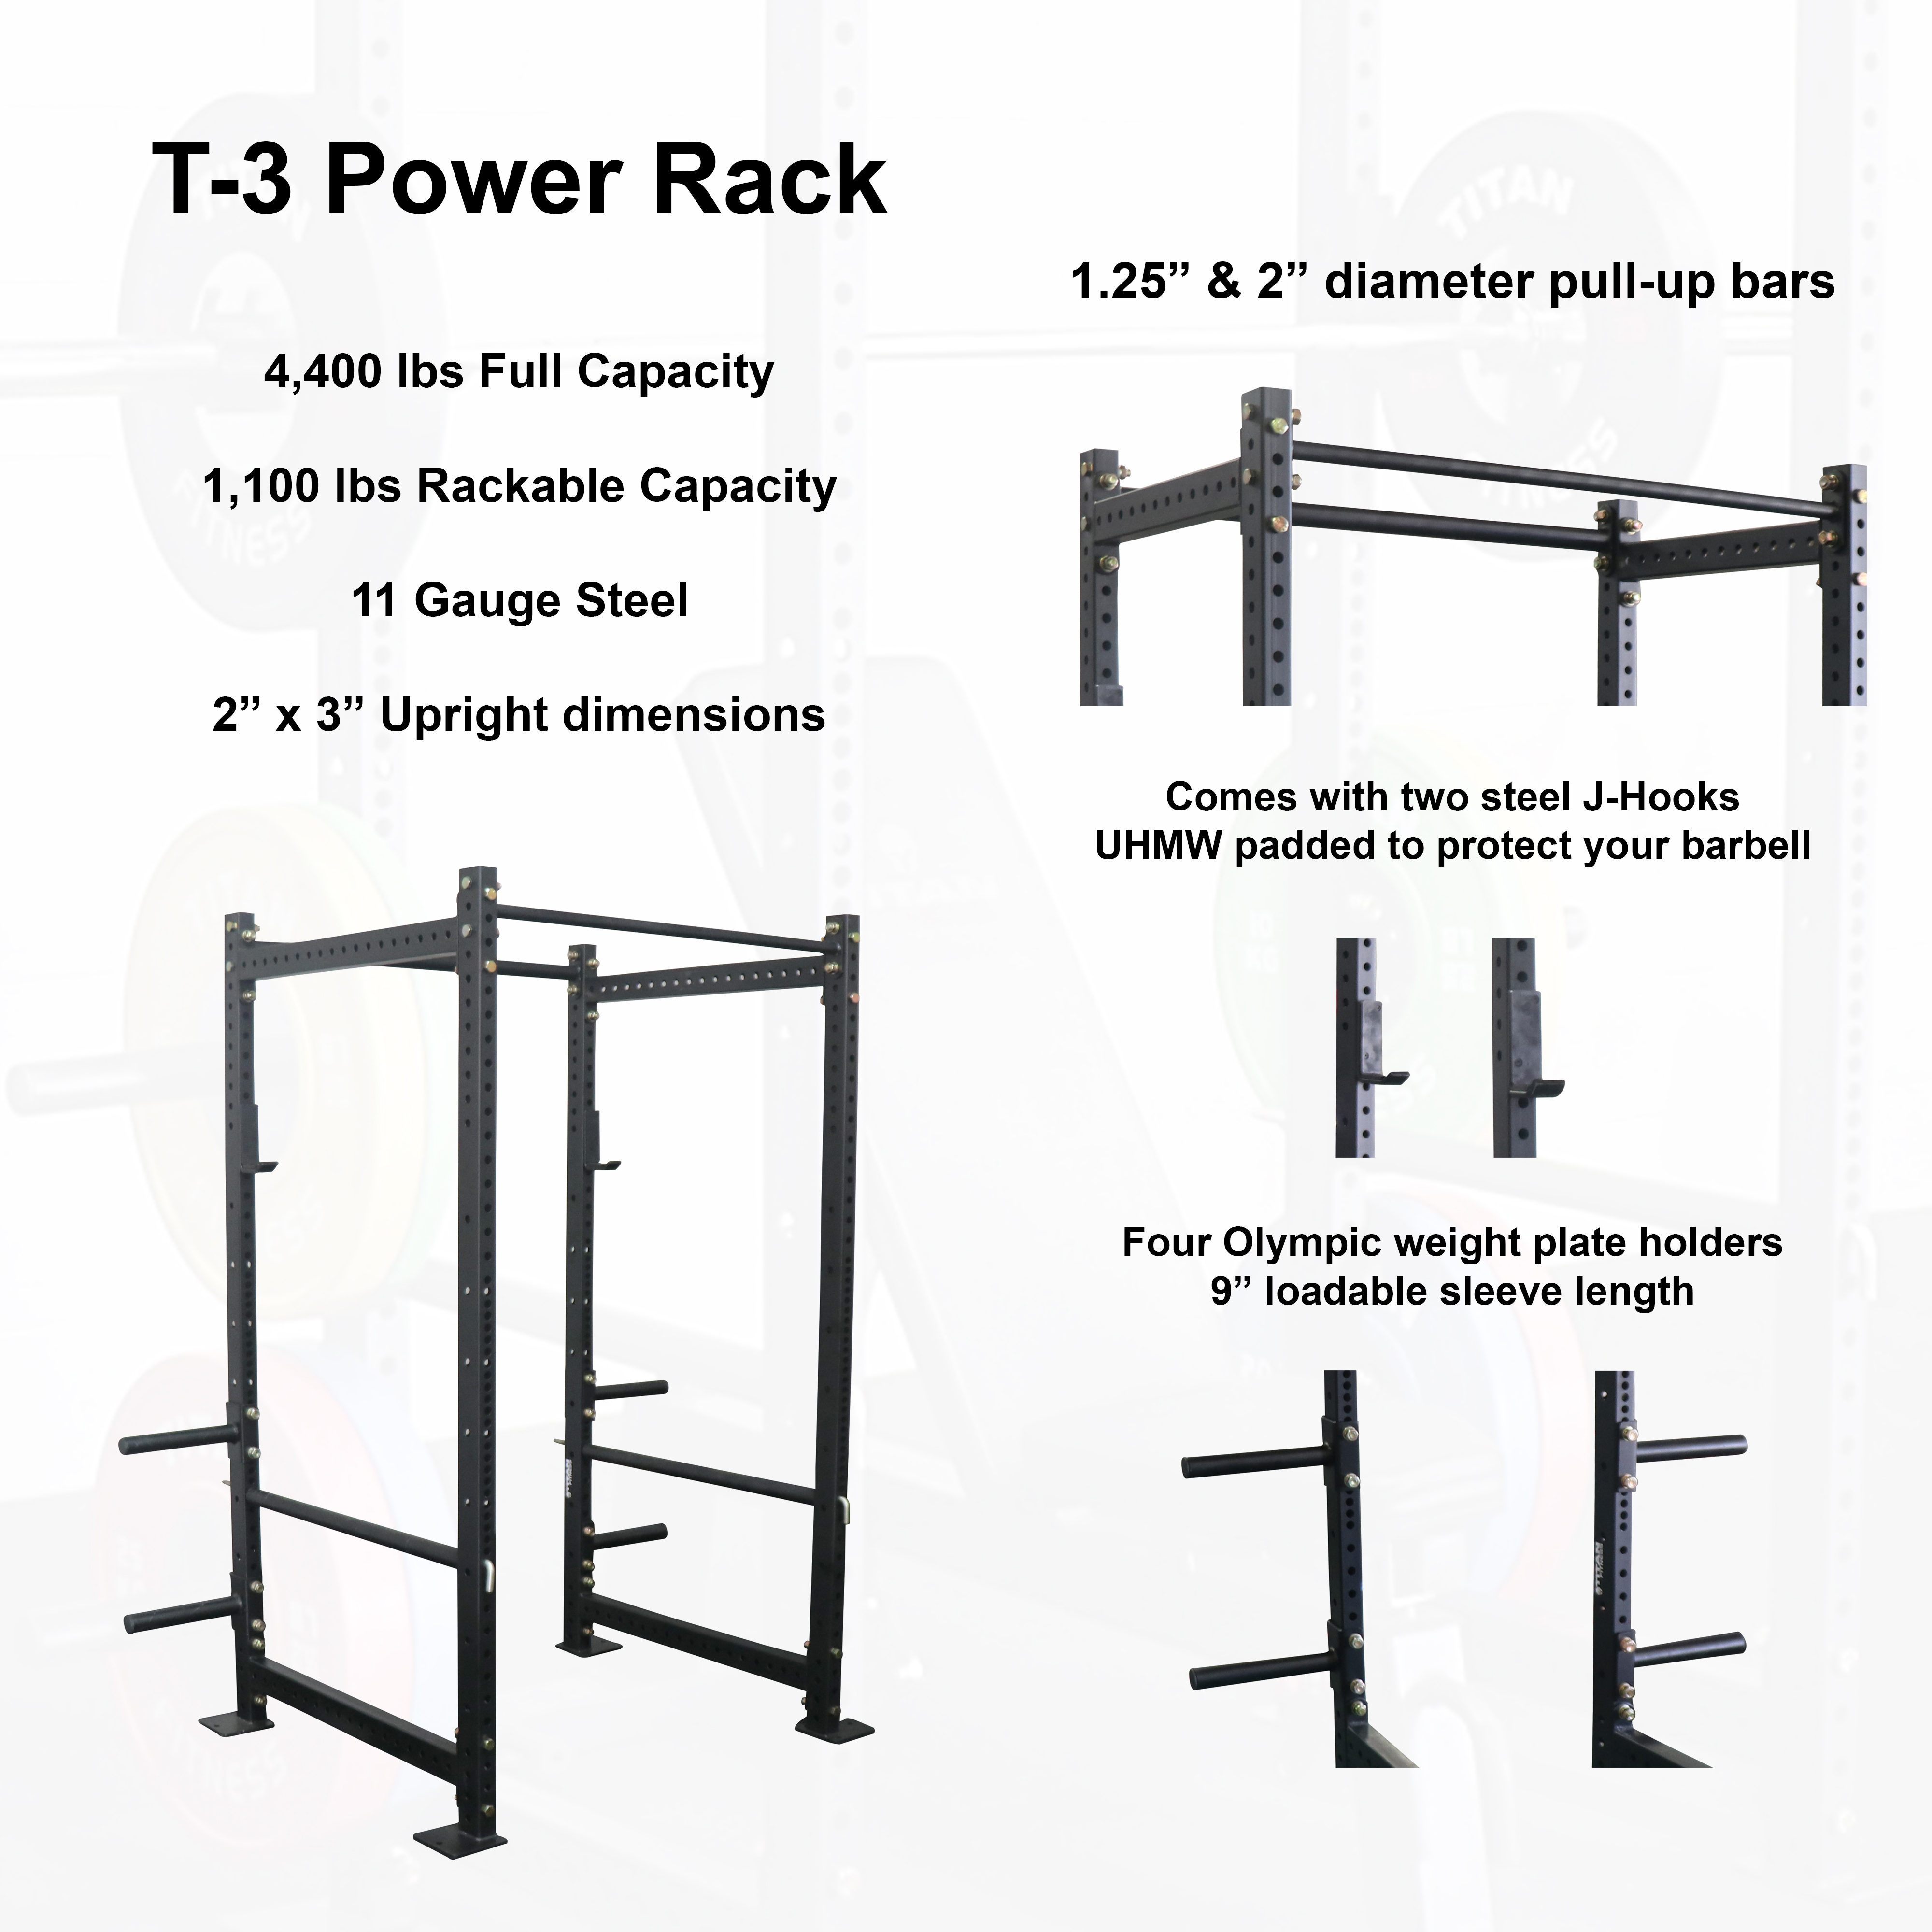 Titan Fitness T-3 Tall Power Rack 36" Depth with Safety Bars and J Hooks - image 2 of 6